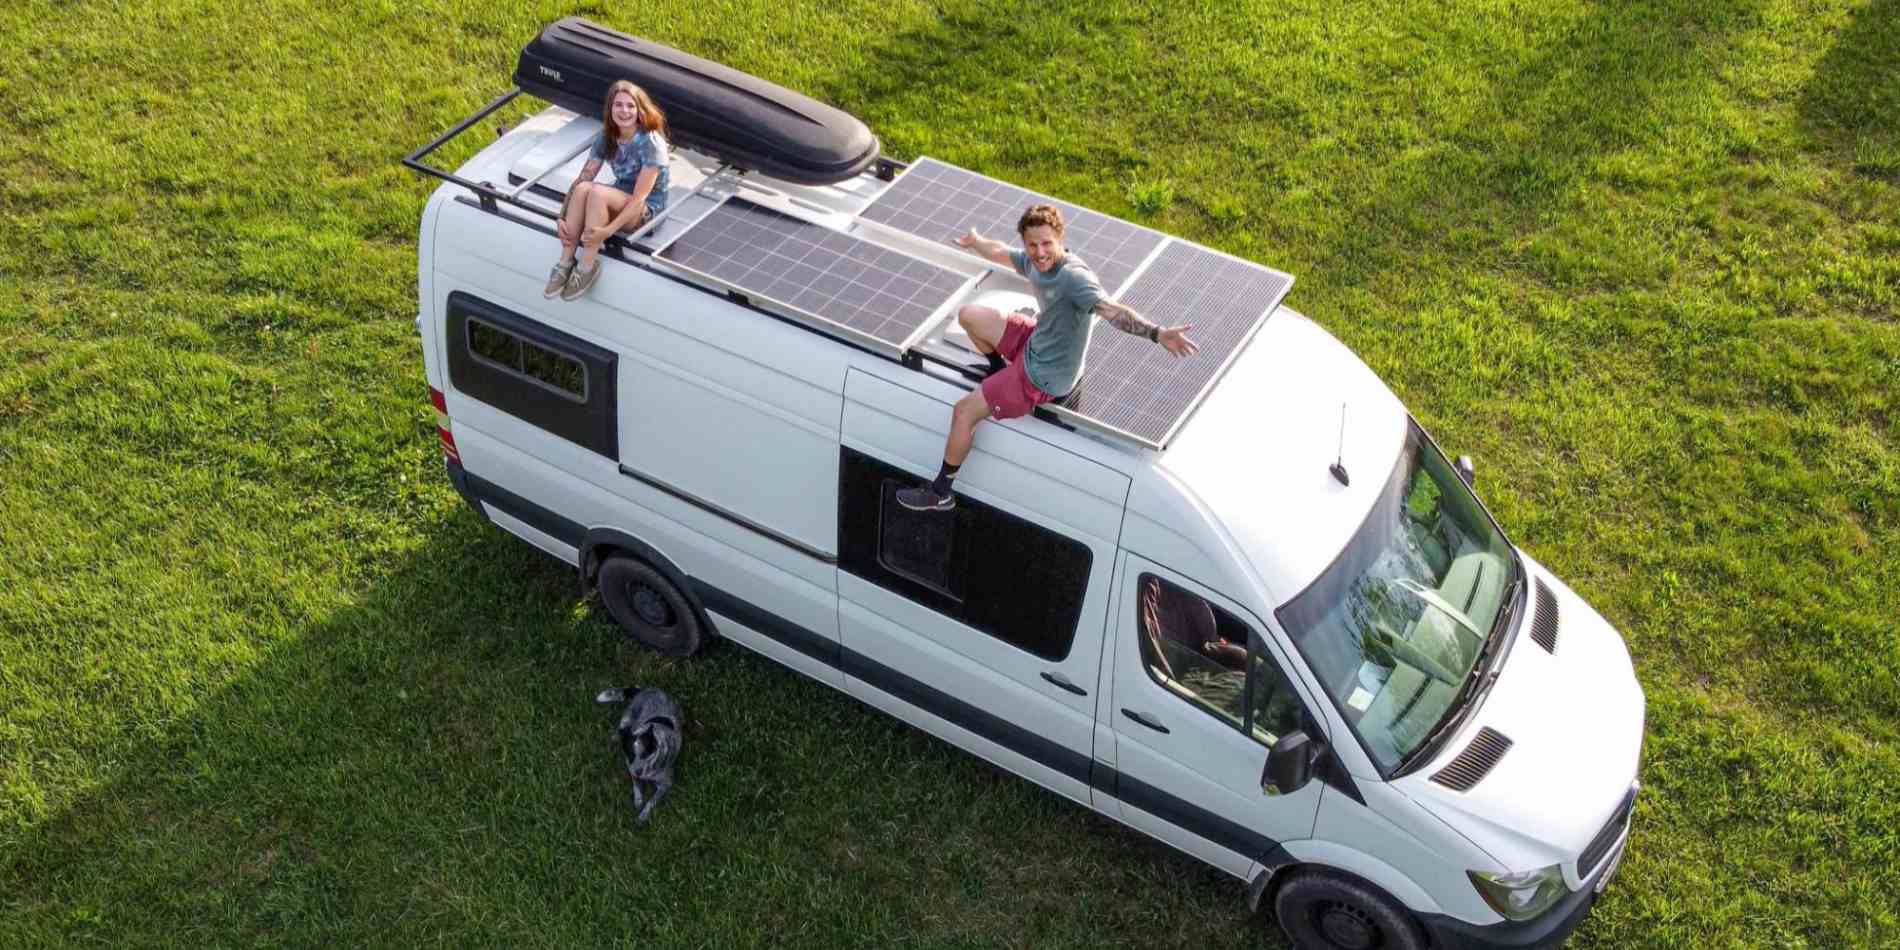 2 people sitting on the RV roof where BougeRV’s solar panels are installed on